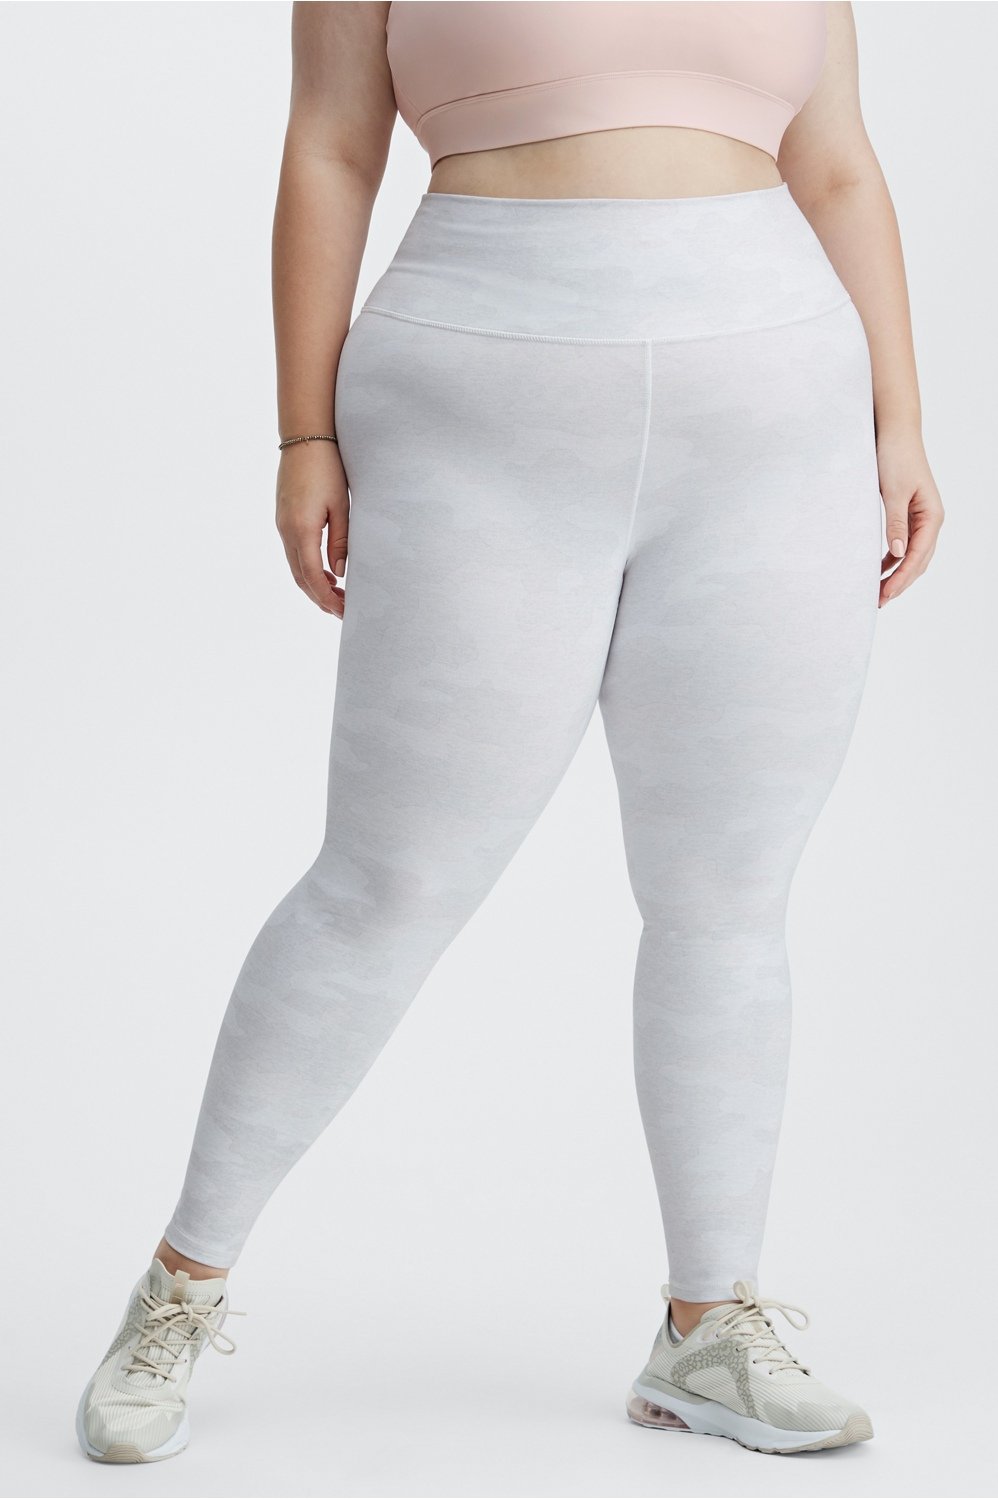 DEAL STACK - 3pk SINOPHANT High Waisted Leggings + 15% Coupon